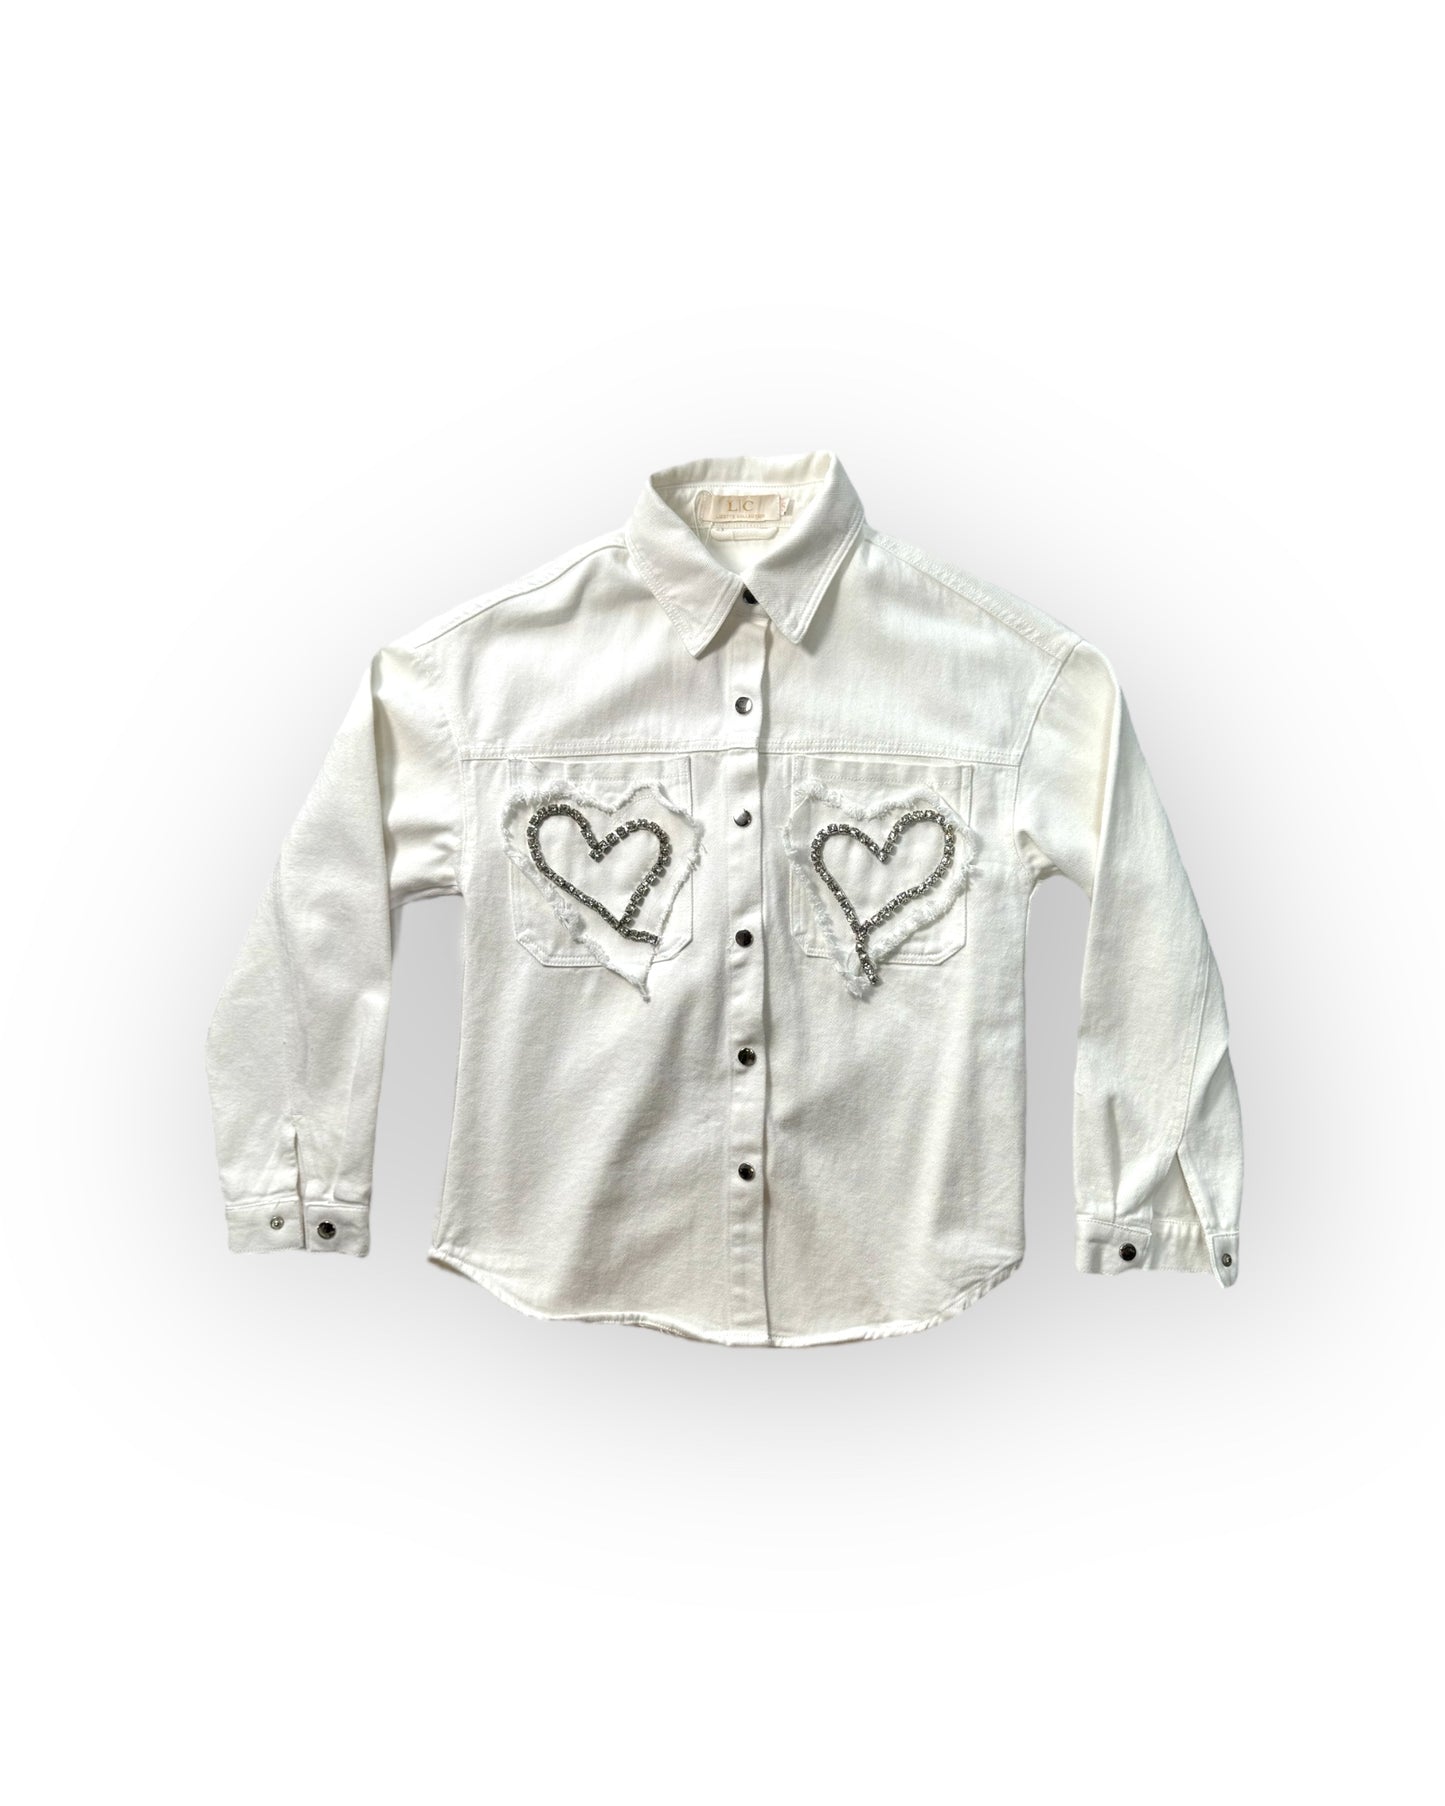 Shirt with Heart Jewelry Accents